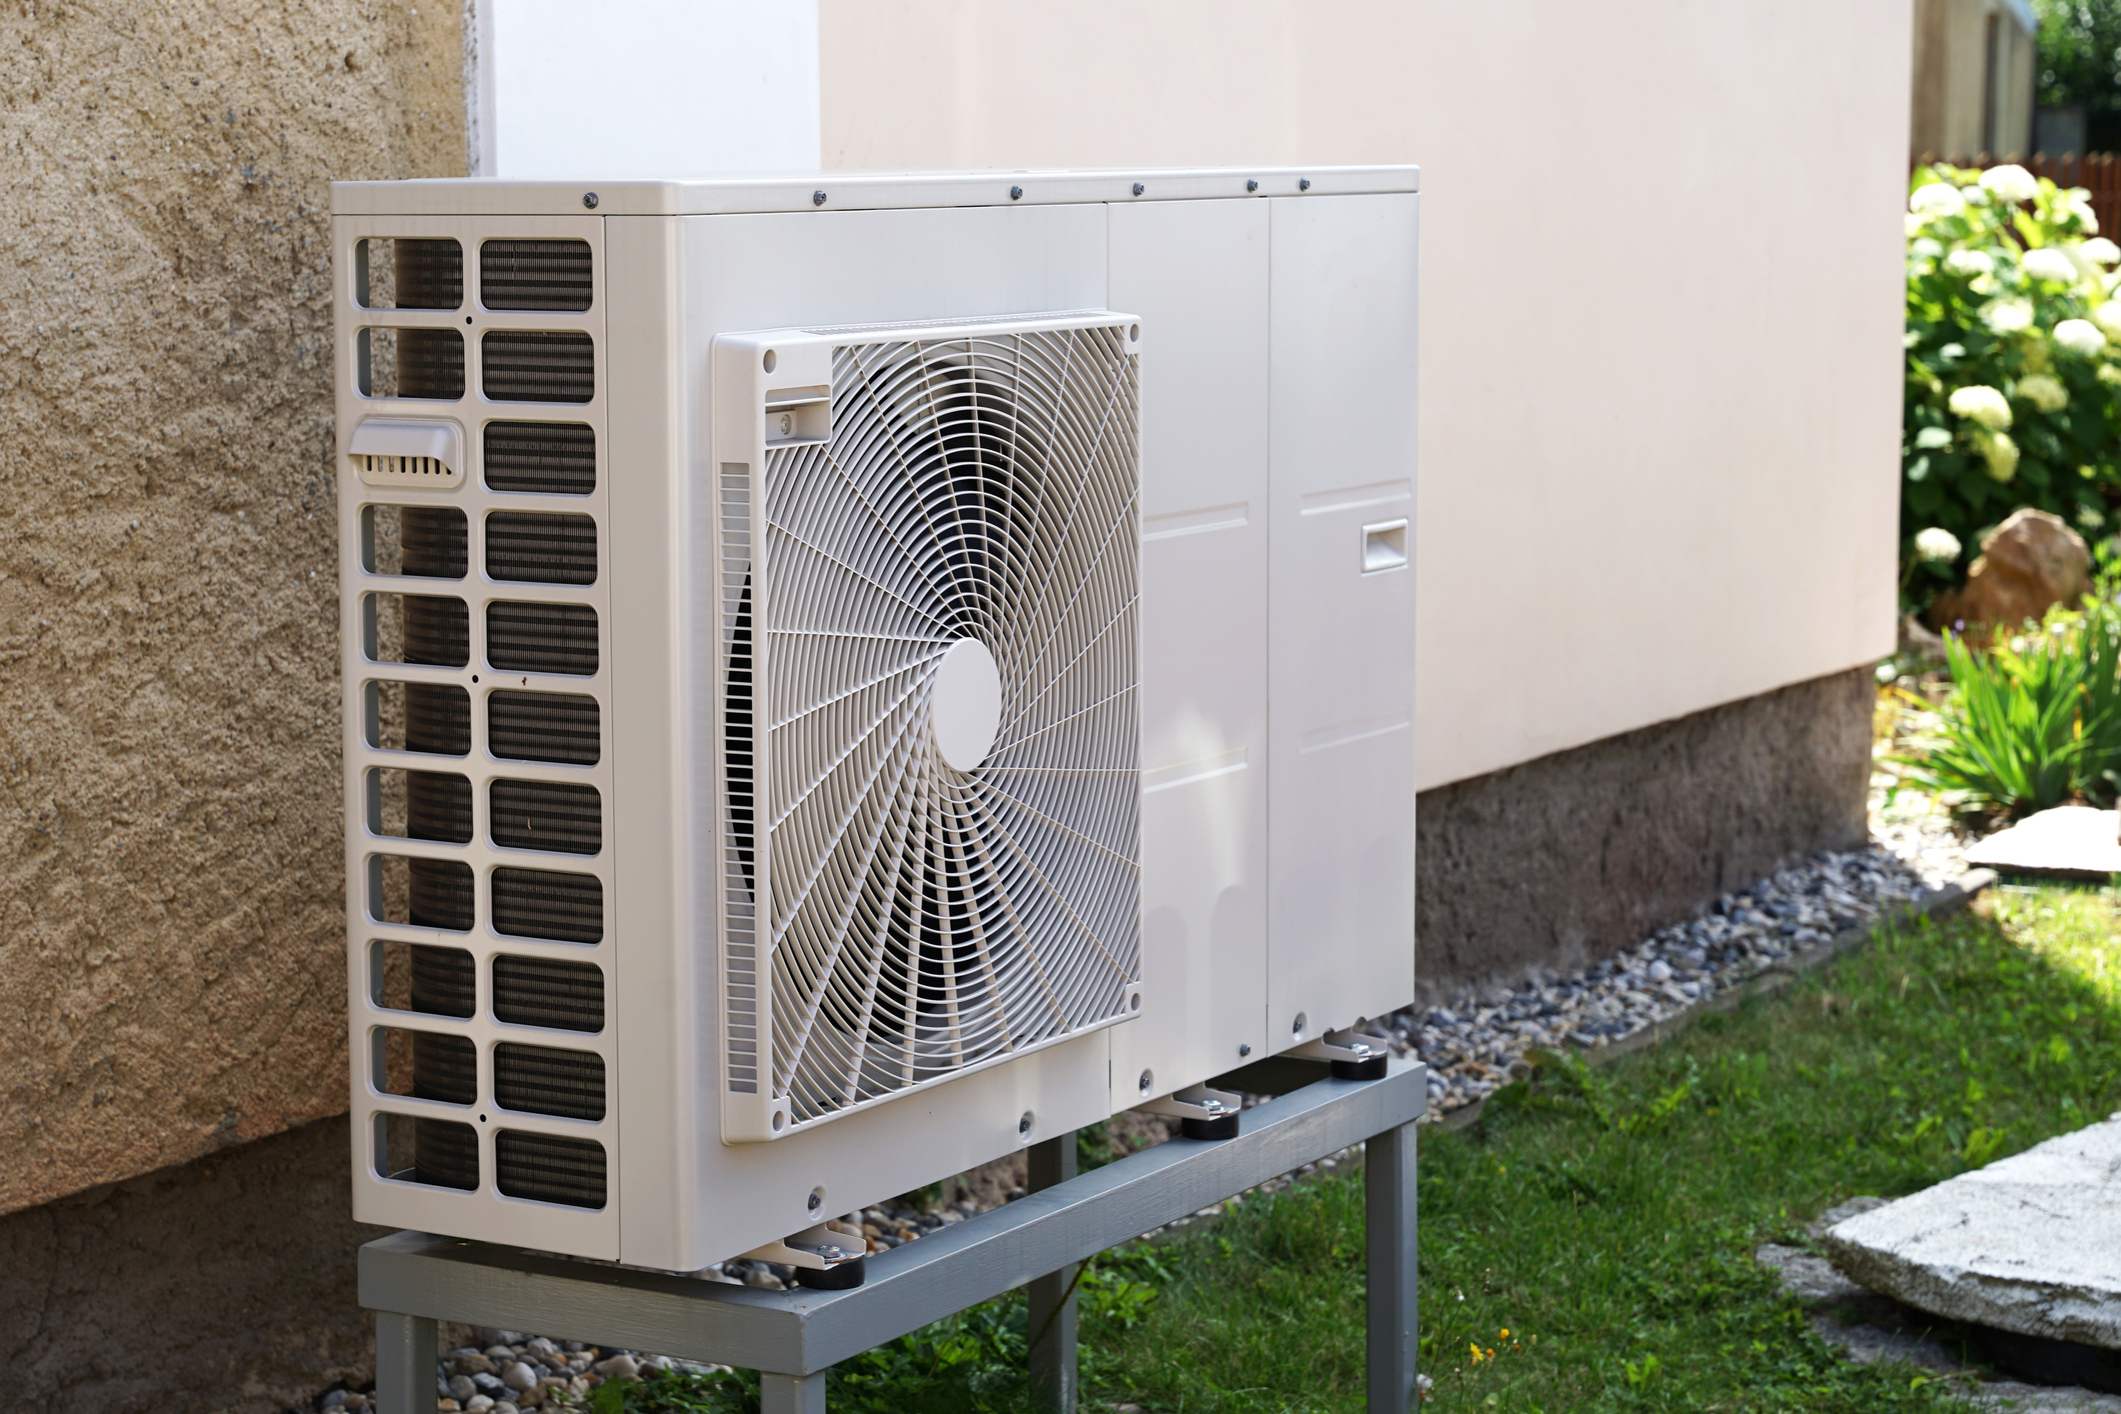 Heat pump mounted on the outside wall of an Ohio home